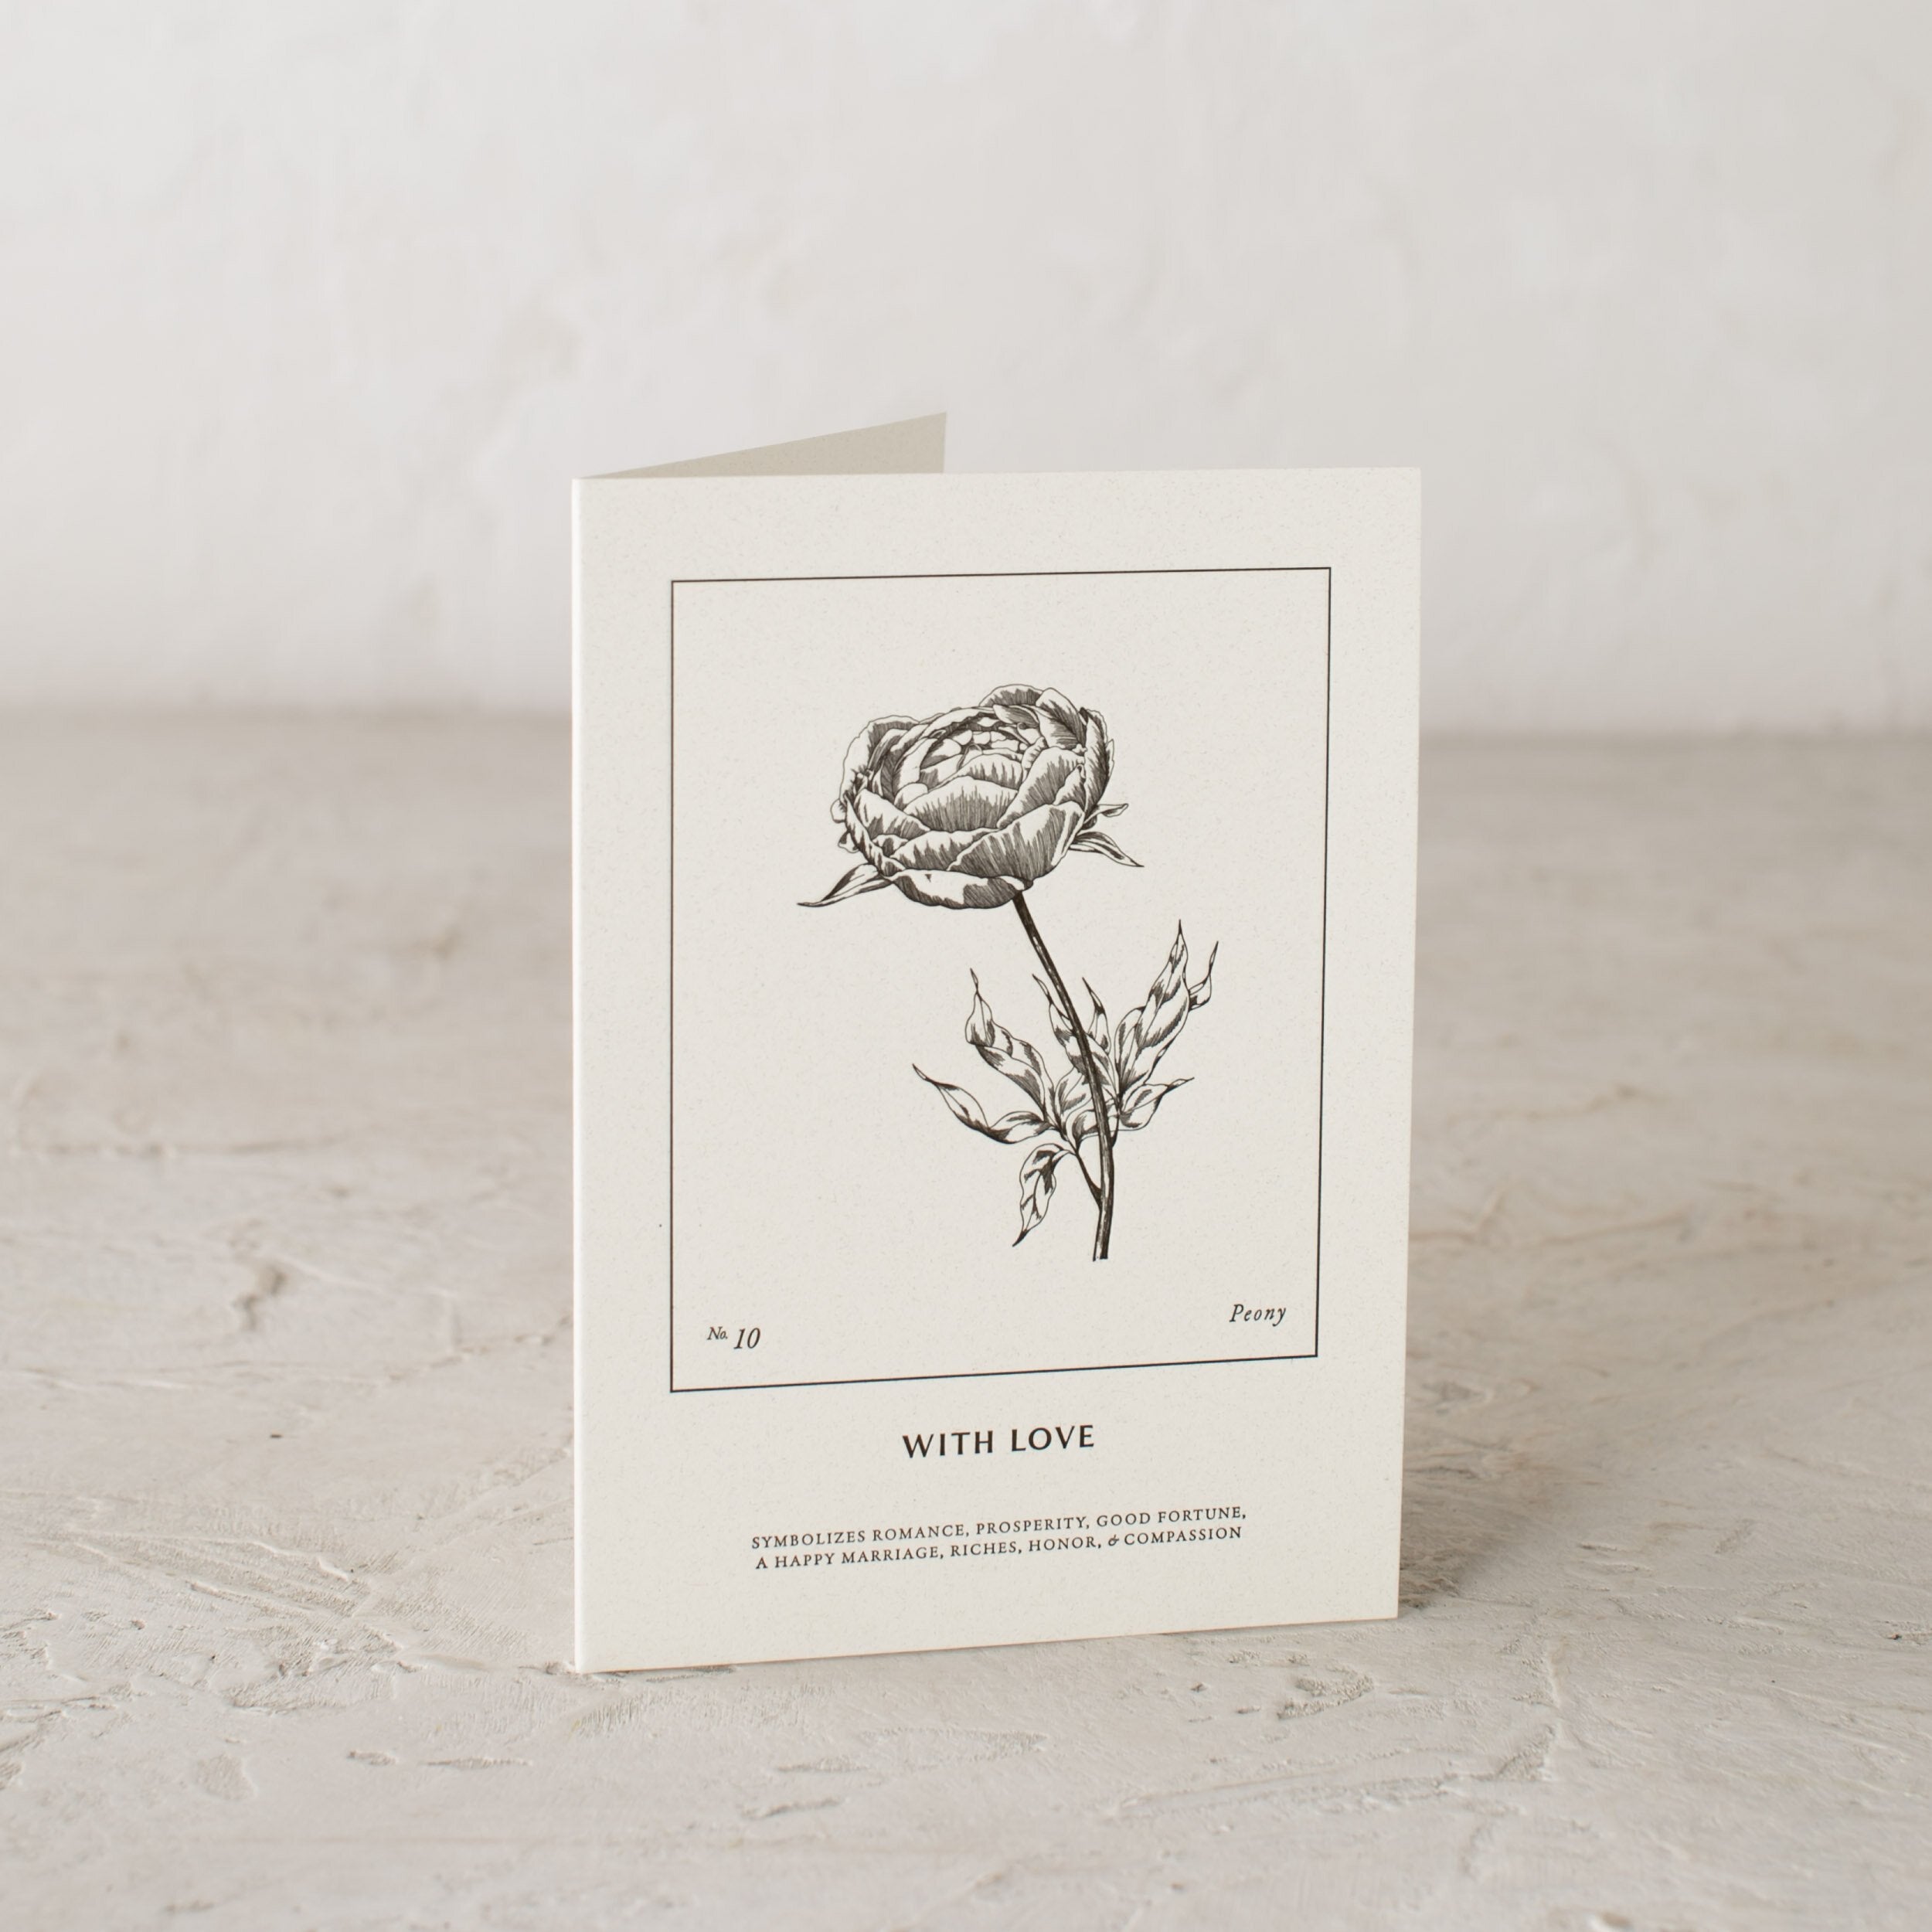 Botanical letter pressed card, Peony illustration - With Love - Symbolizes romance, prosperity, good fortune, a happy marriage, riches, honor and compassion. Letter pressed greeting card designed and sold by shop verdant, Kansas City gift store.